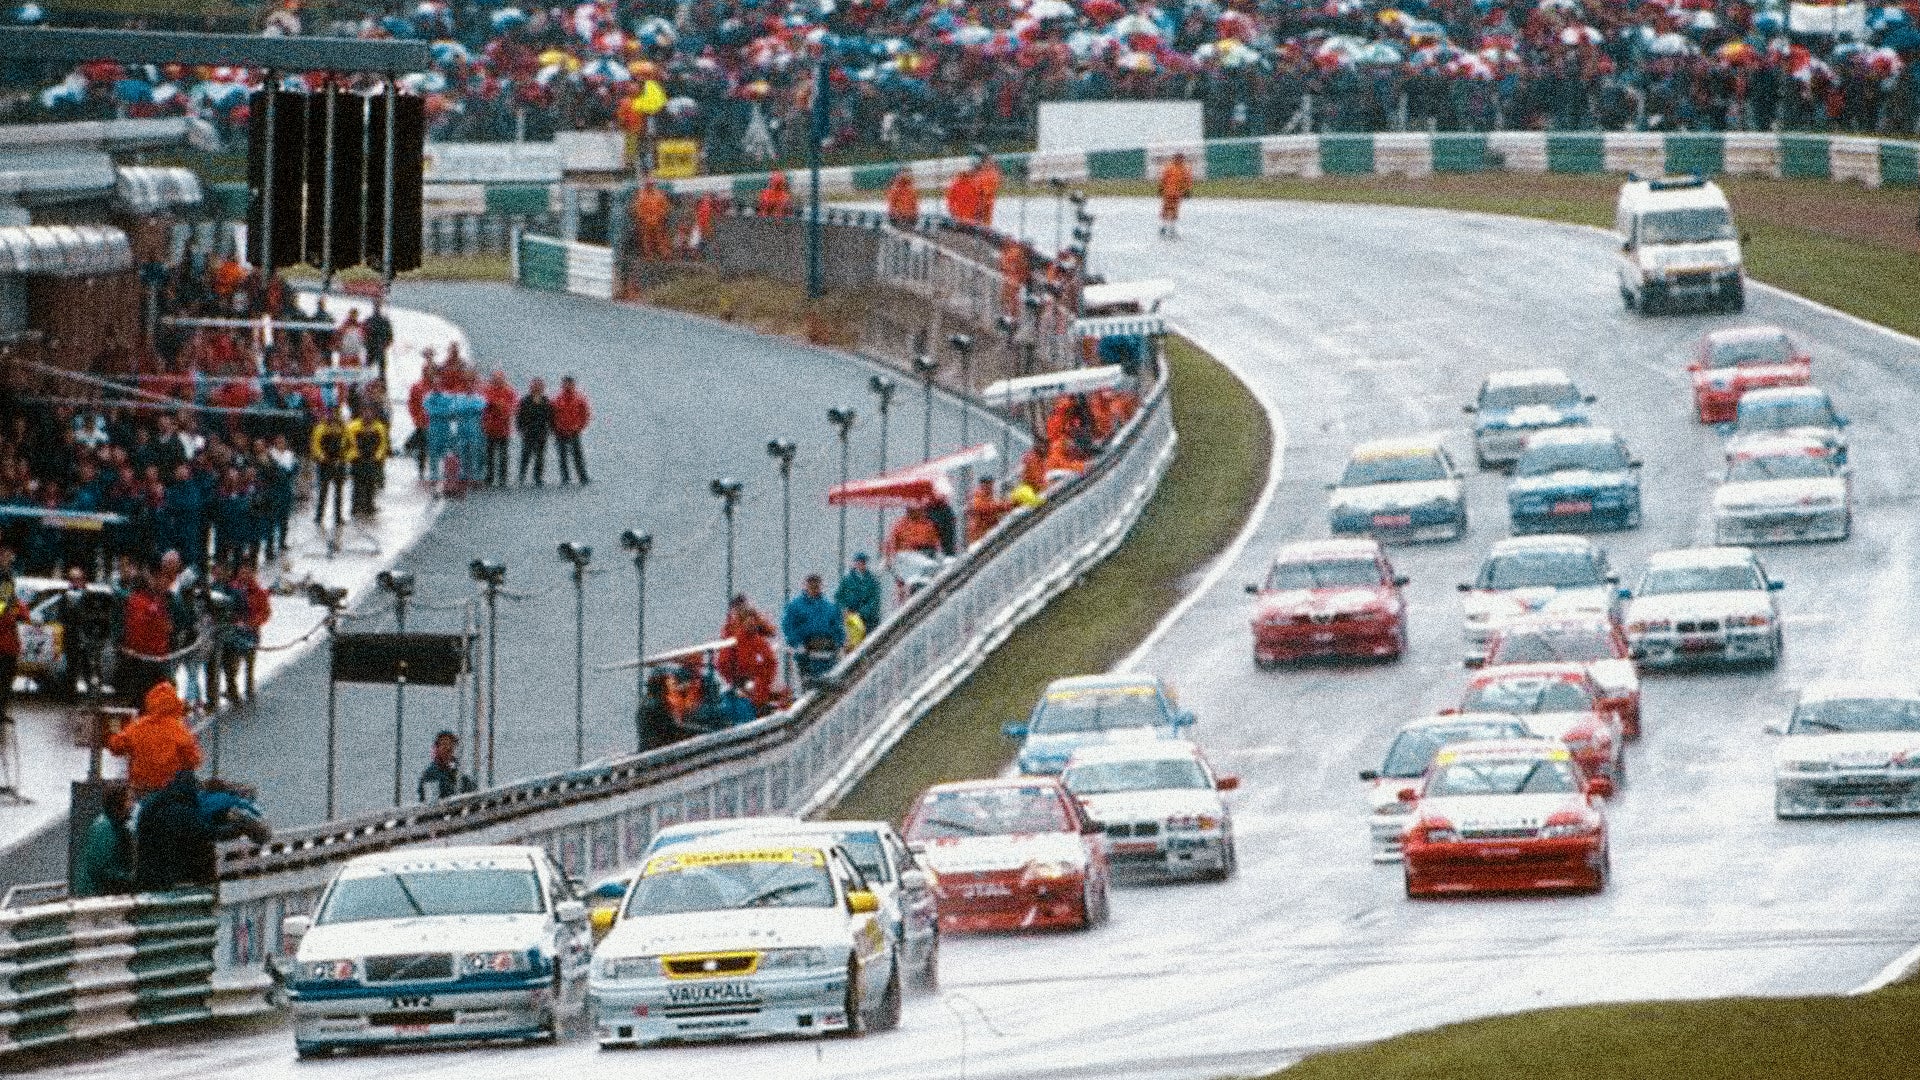 Super Touring: The Iconic Racing Series that Inspired a Generation and Our Wheels